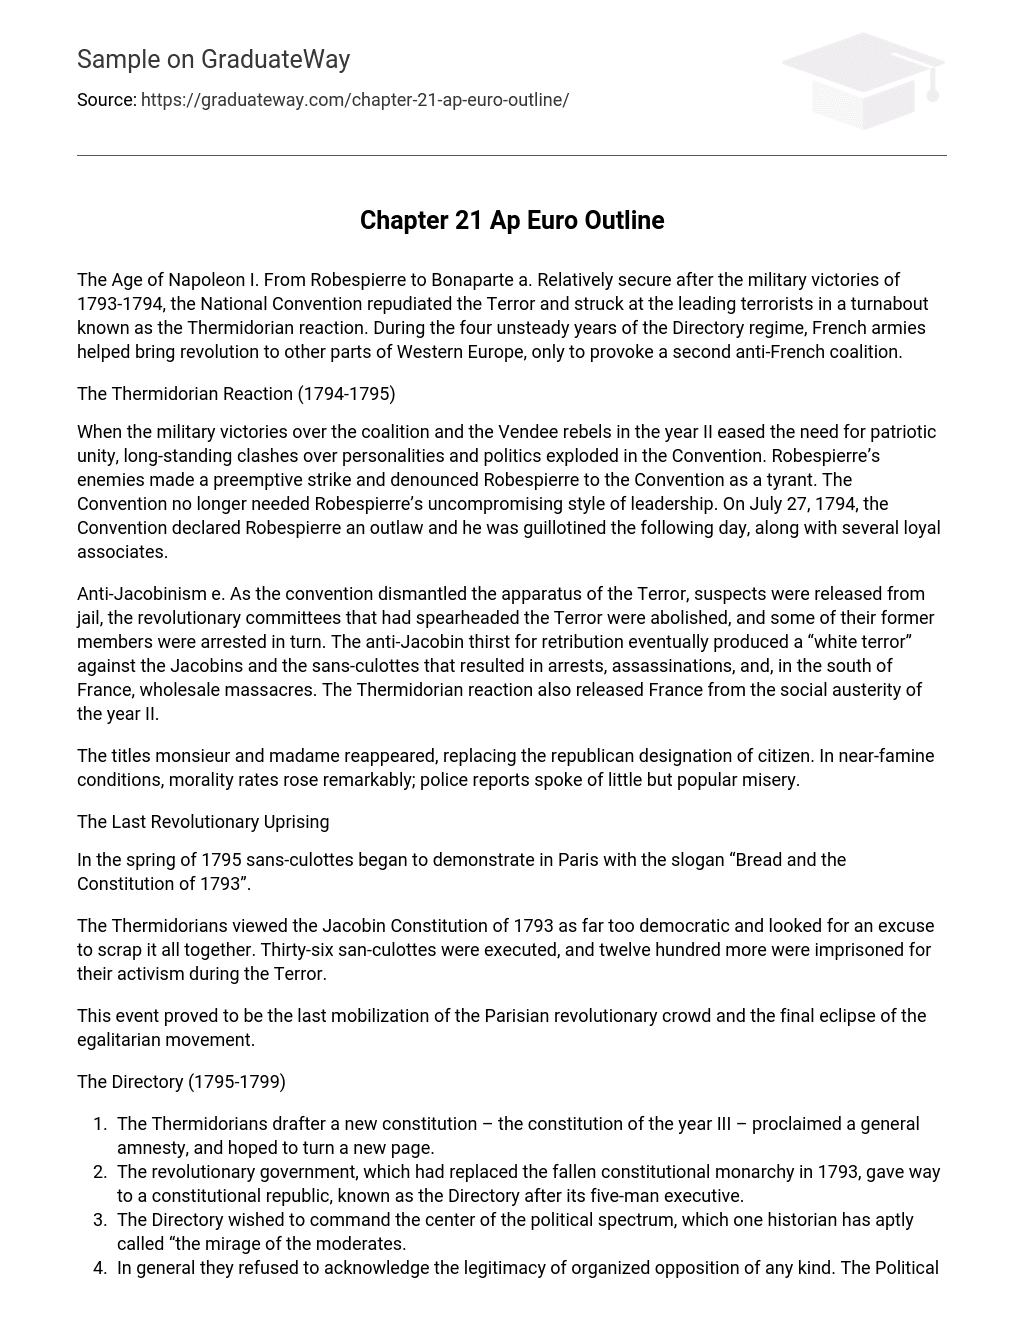 Chapter 21 Ap Euro Outline